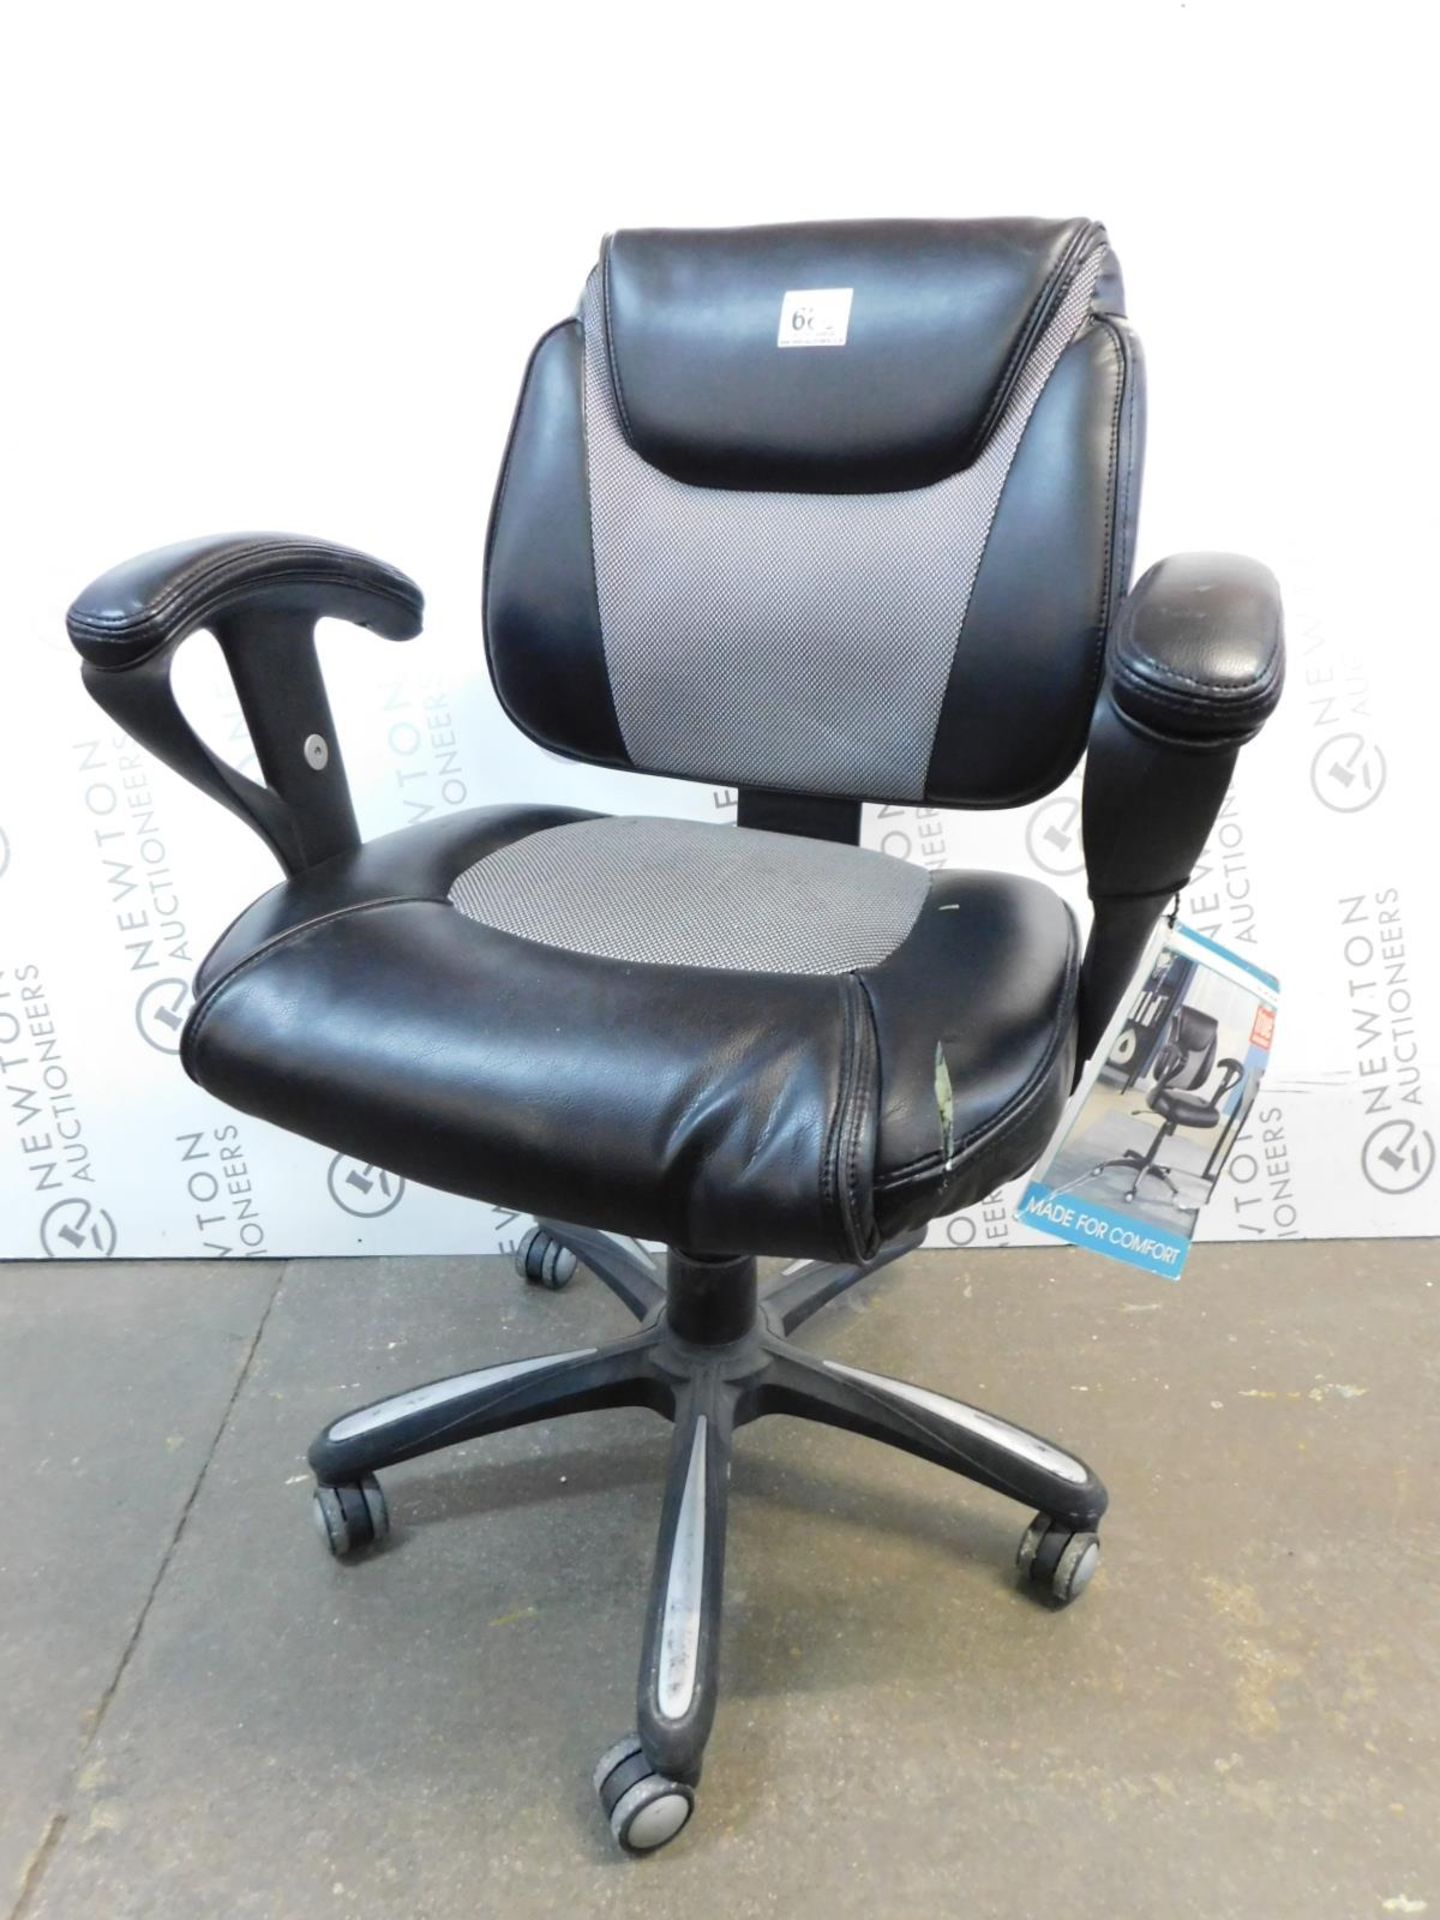 1 TRUE INNOVATIONS BLACK BONDED GAS LIFT STUDENT CHAIR RRP Â£129.99 - Image 2 of 2